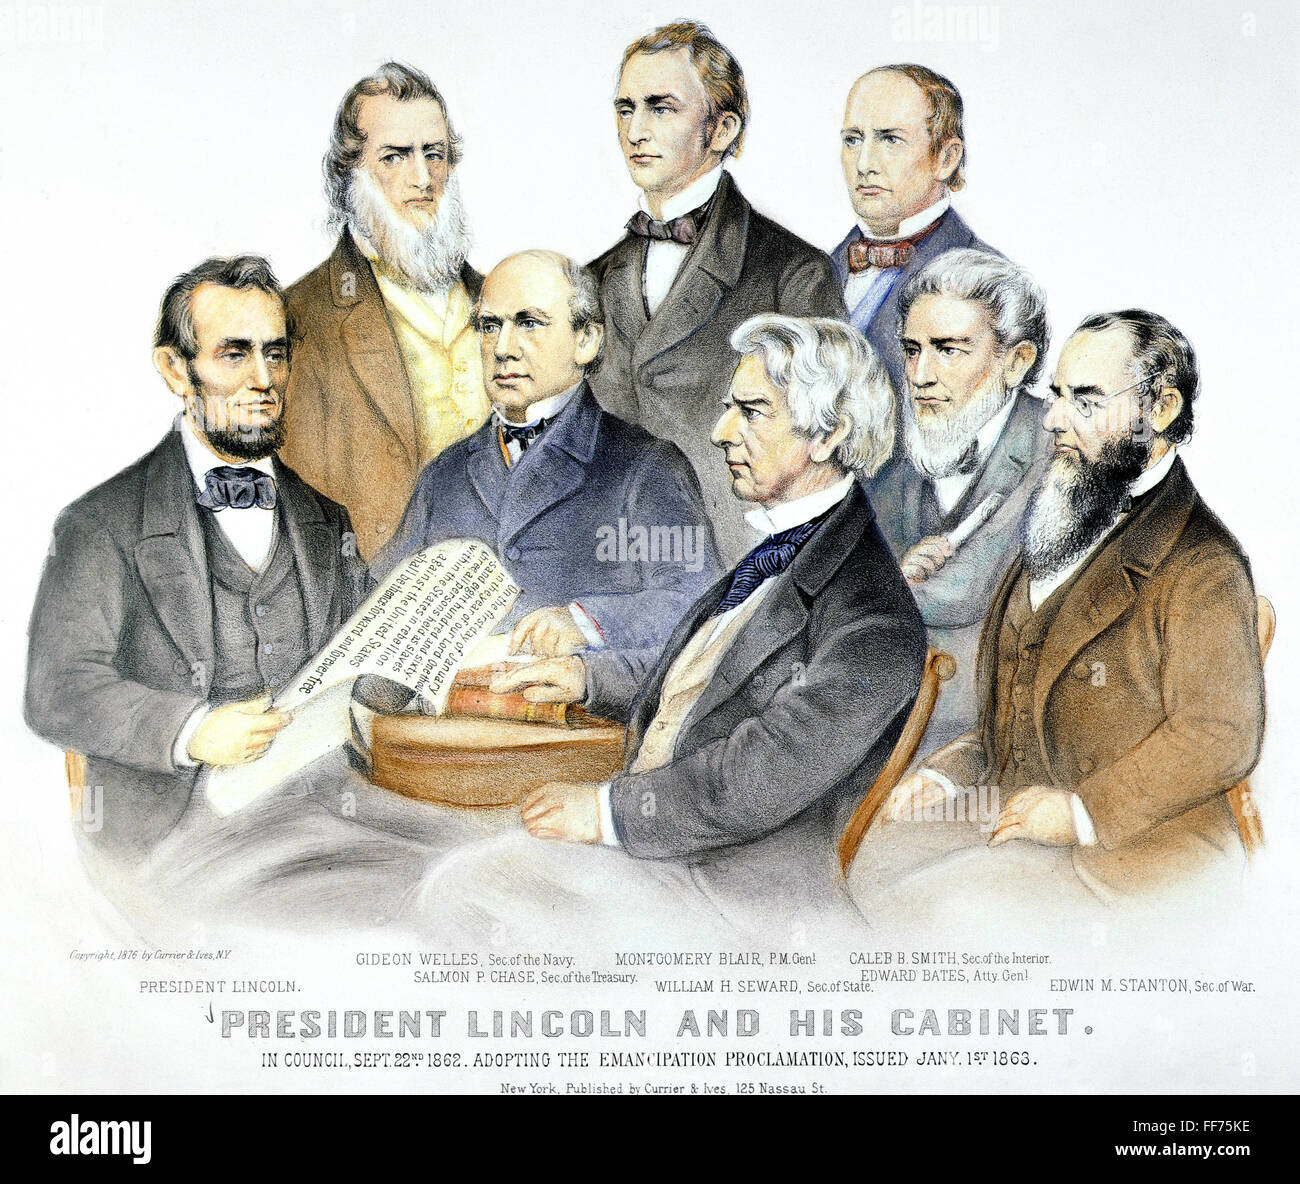 ABRAHAM LINCOLN'S CABINET. /nPresident Lincoln and his cabinet in council on 22 September 1862, adopting the Emancipation Proclamation, issued 1 January 1863. Lithograph by Currier & Ives, 1876. Stock Photo